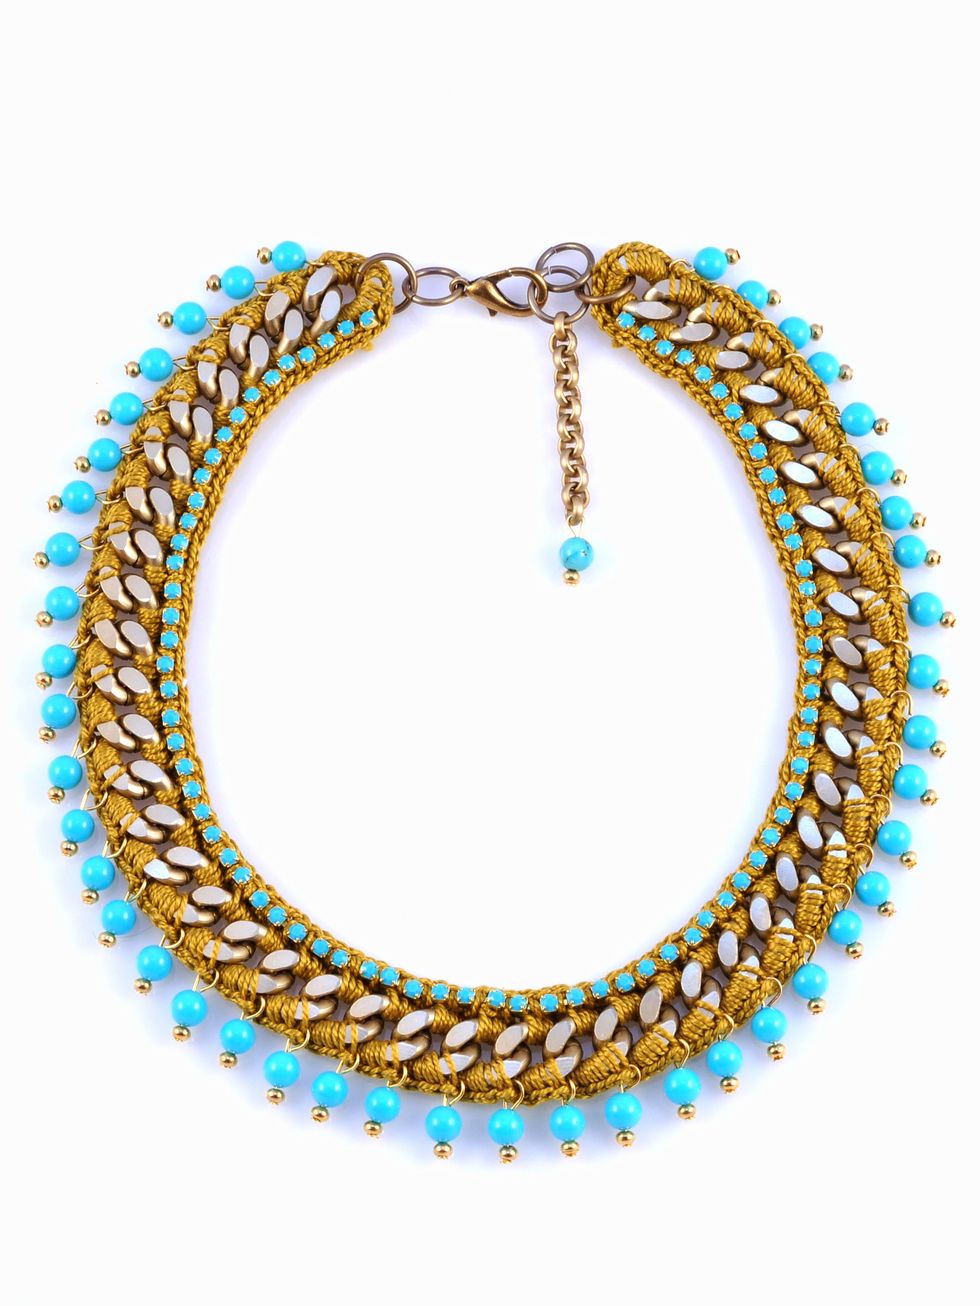 Jewellery, Fashion accessory, Body jewelry, Turquoise, Aqua, Natural material, Teal, Circle, Gemstone, Jewelry making, 